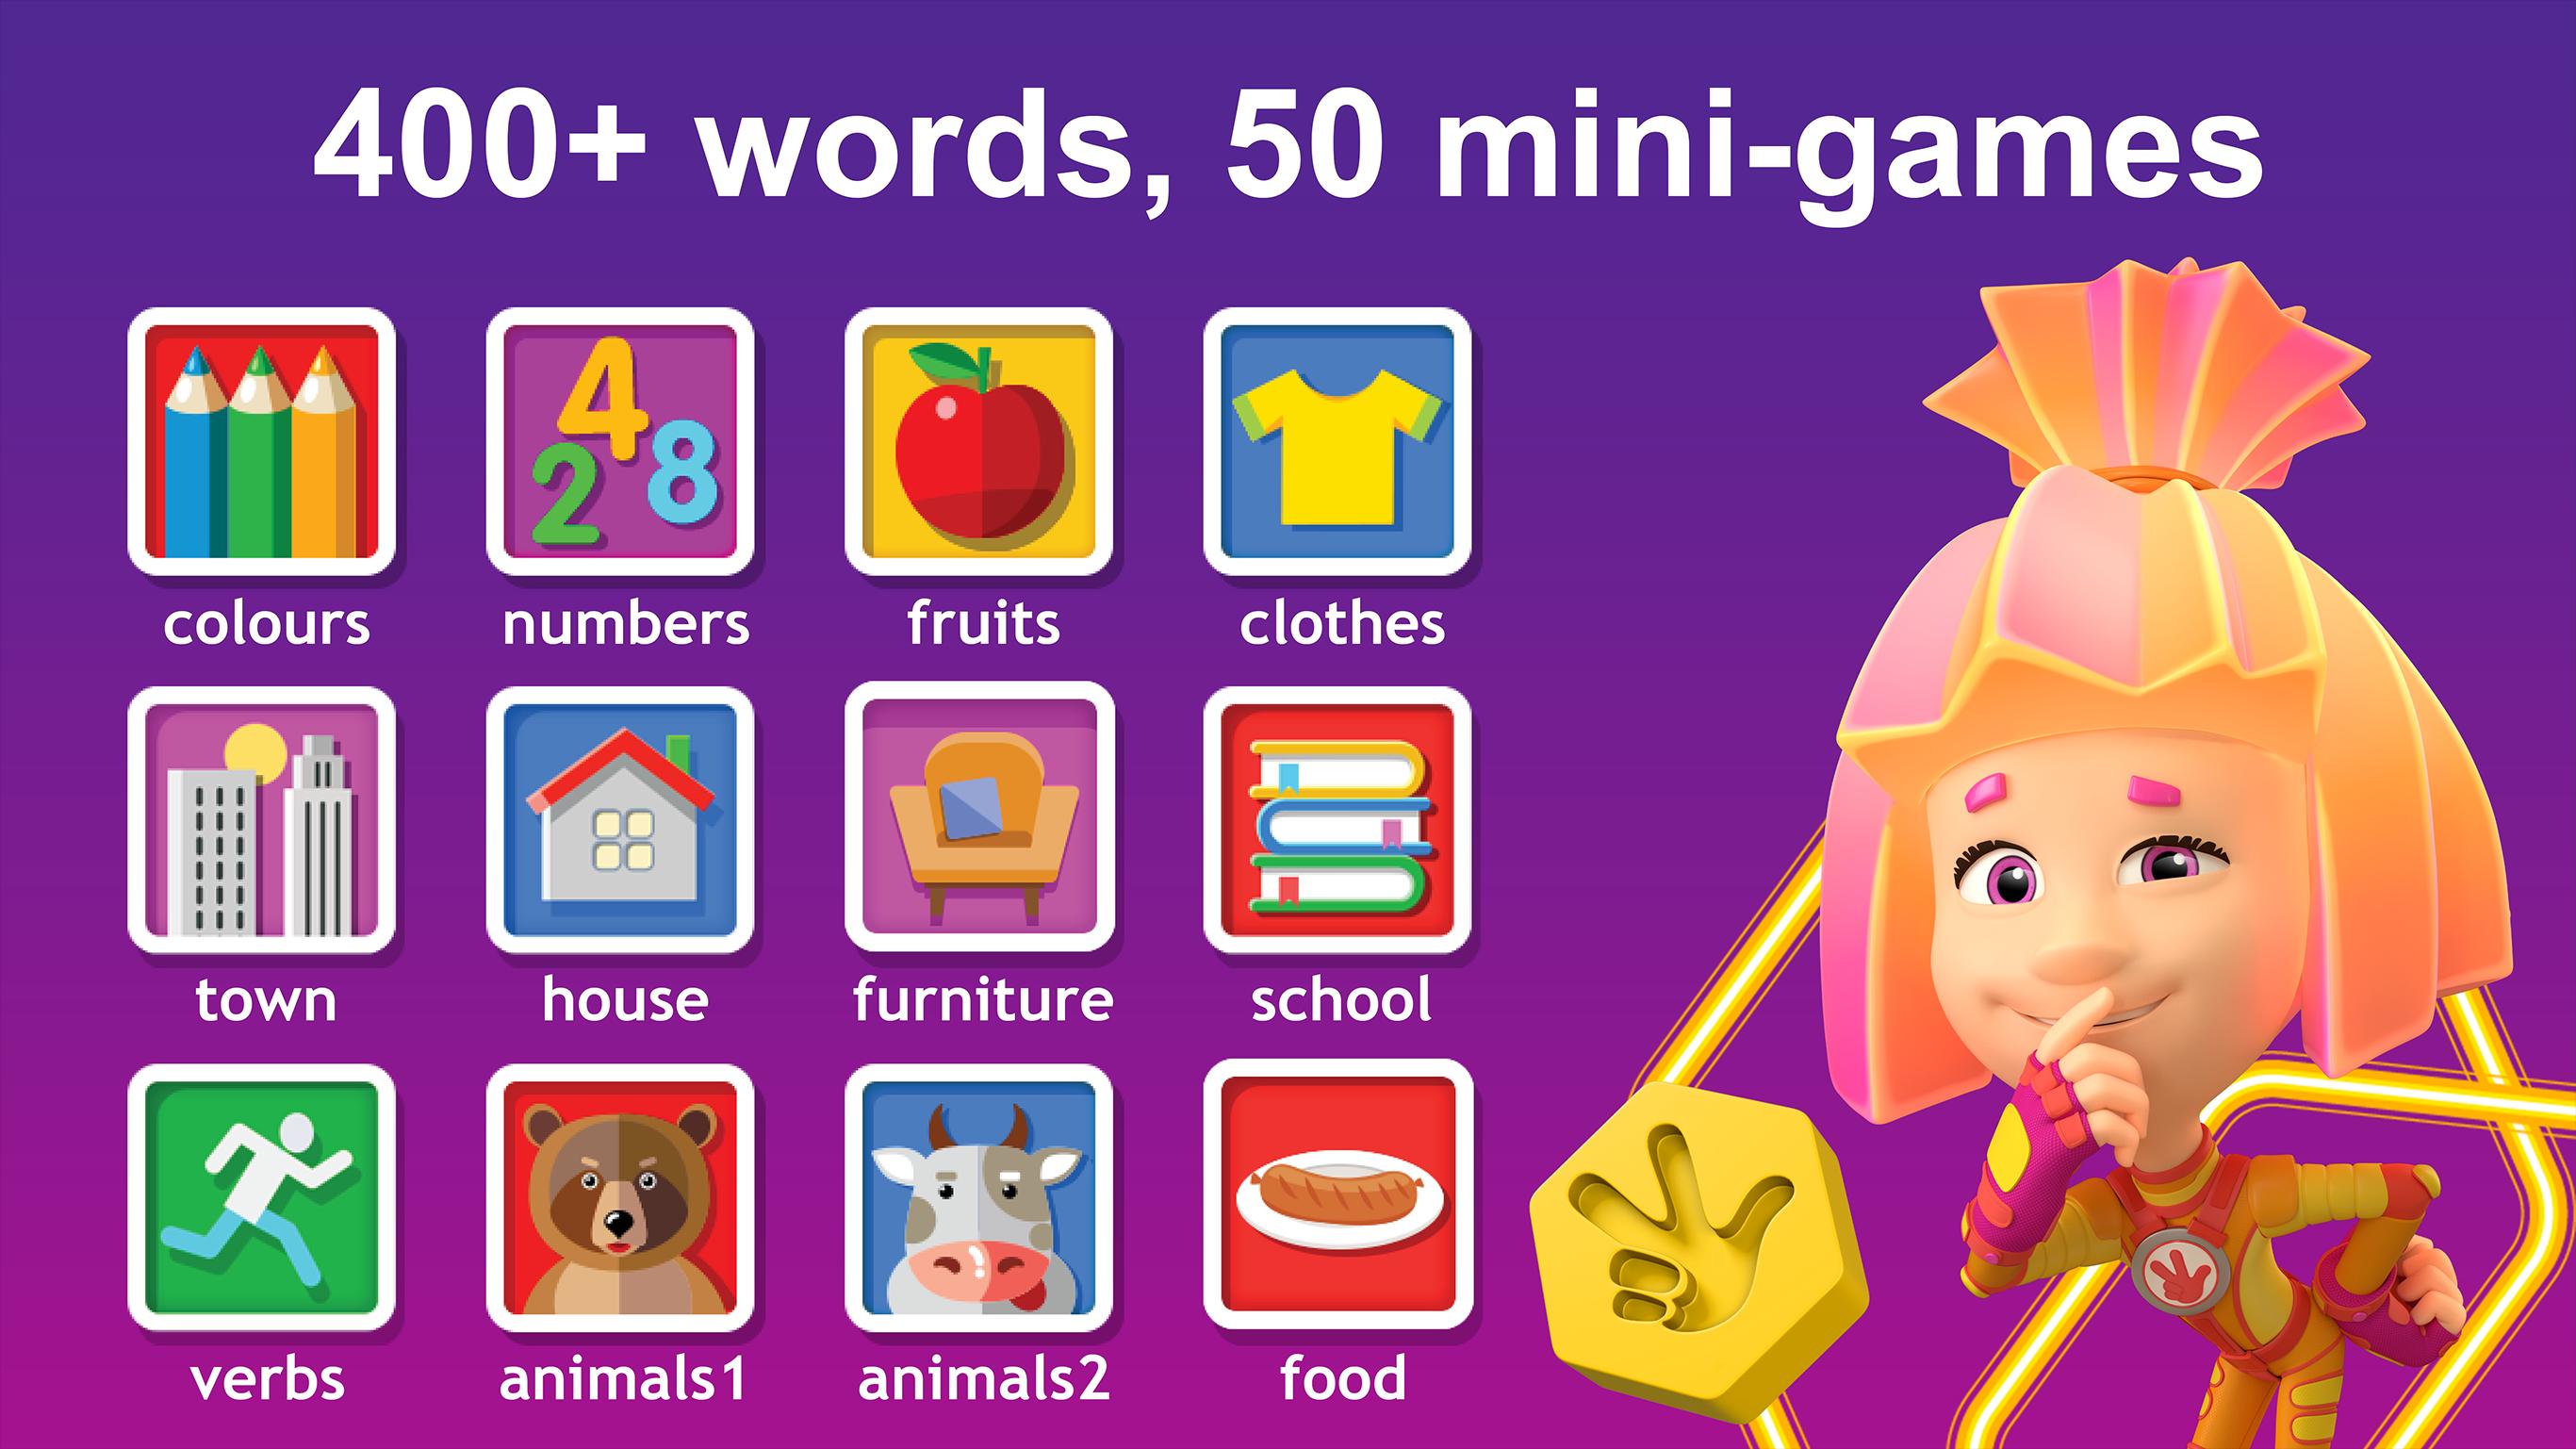 clothes vocabulary Archives - Games to learn English